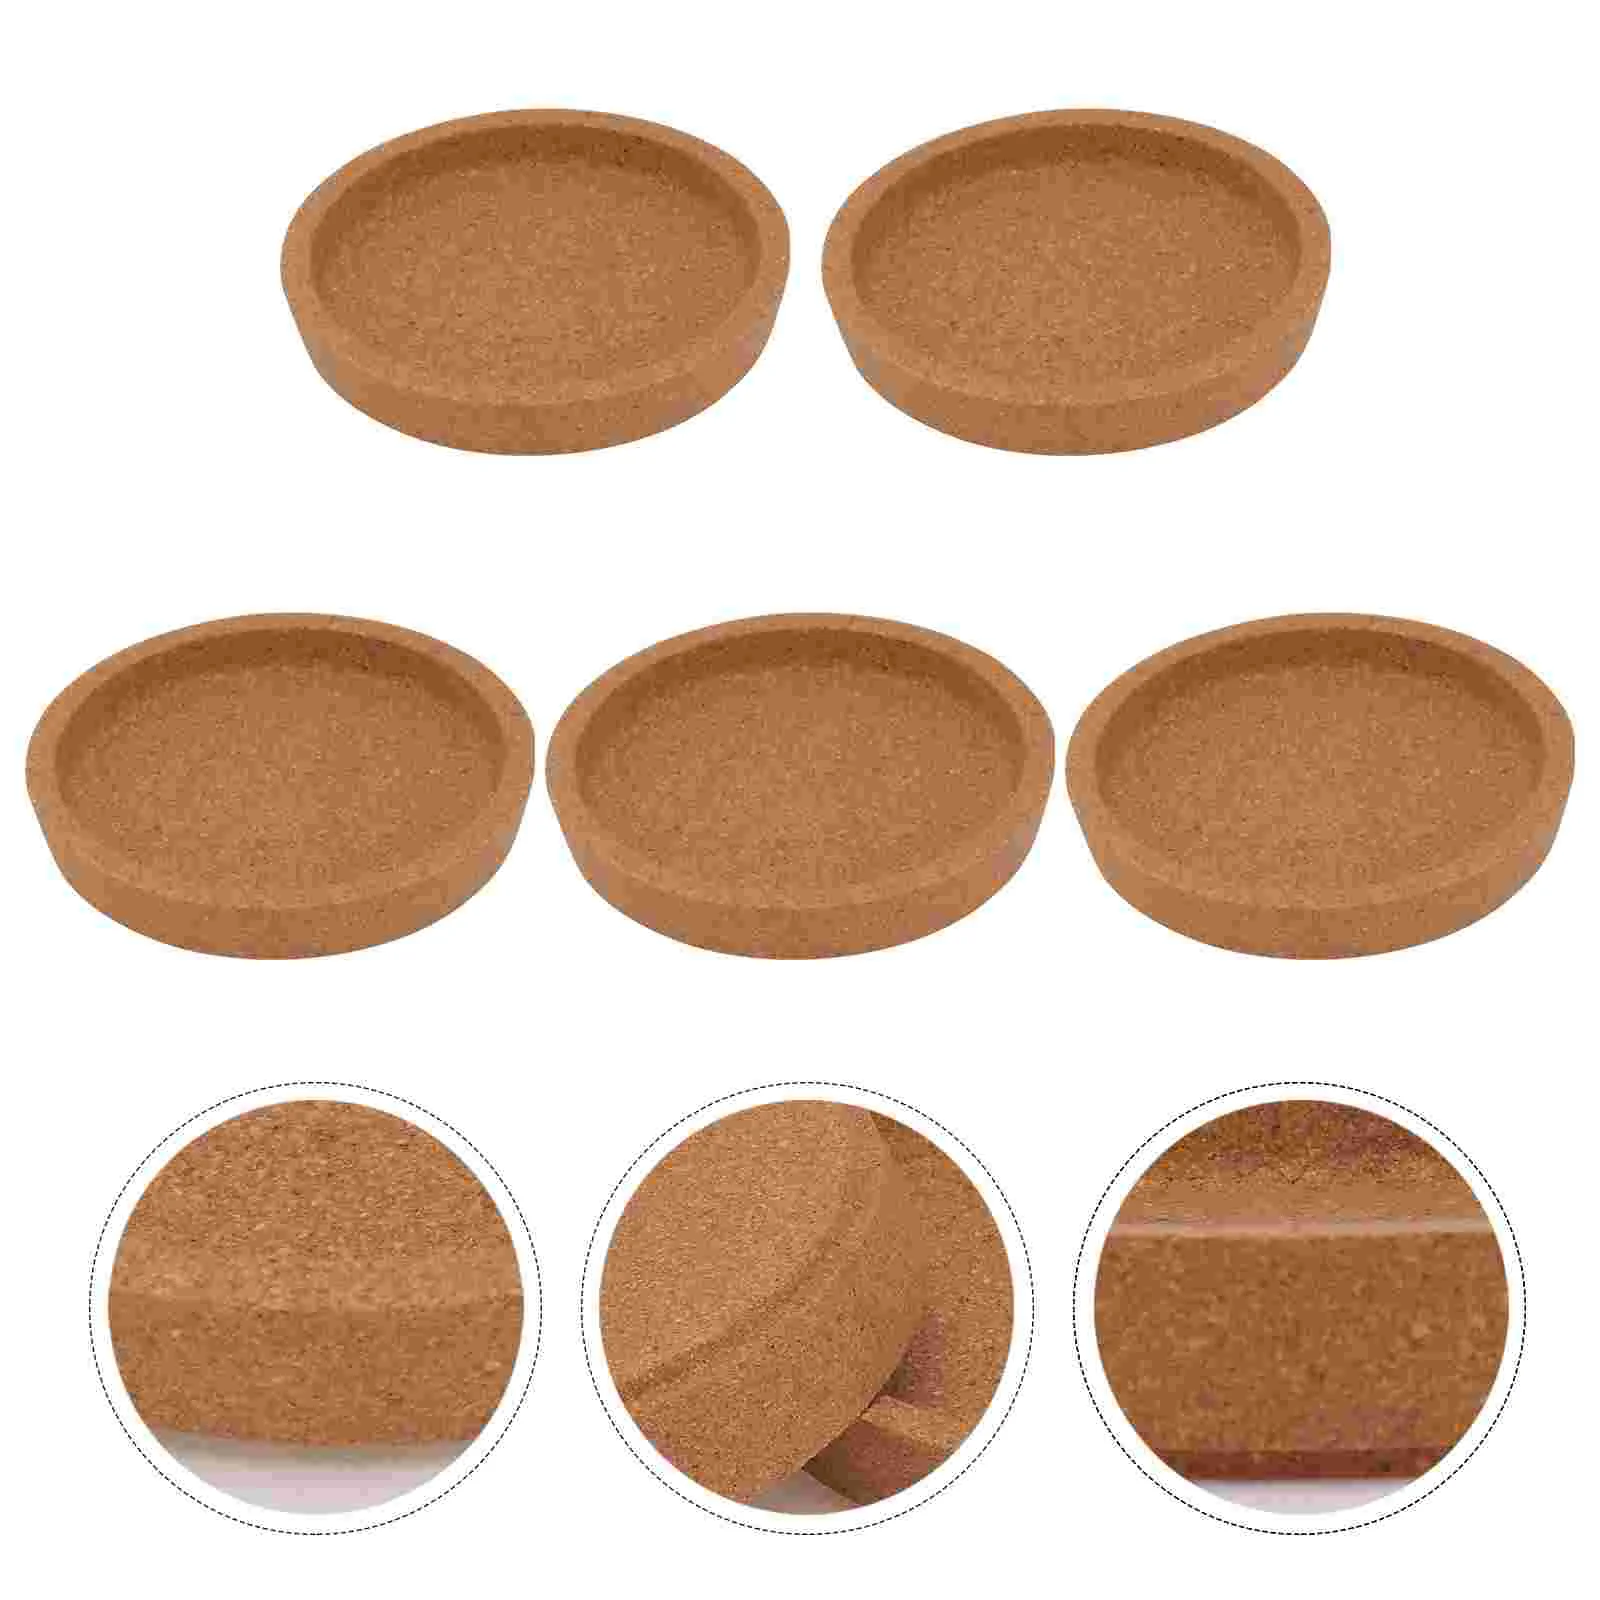 

Coasters Cup Coaster Mat Cork Wood Drink Round Table Natural Mug Heat Resistant Absorbent Placemats Wooden Teacup Mugs Placemat